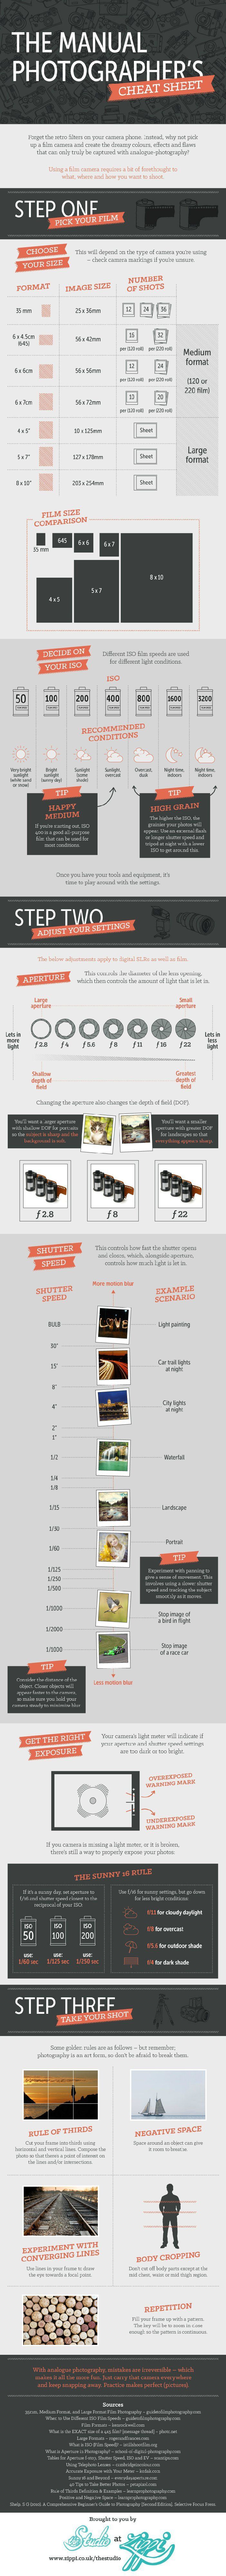 This infographic/cheat sheet from Zippi might be helpful for those looking to get out of auto mode and gaining more control over